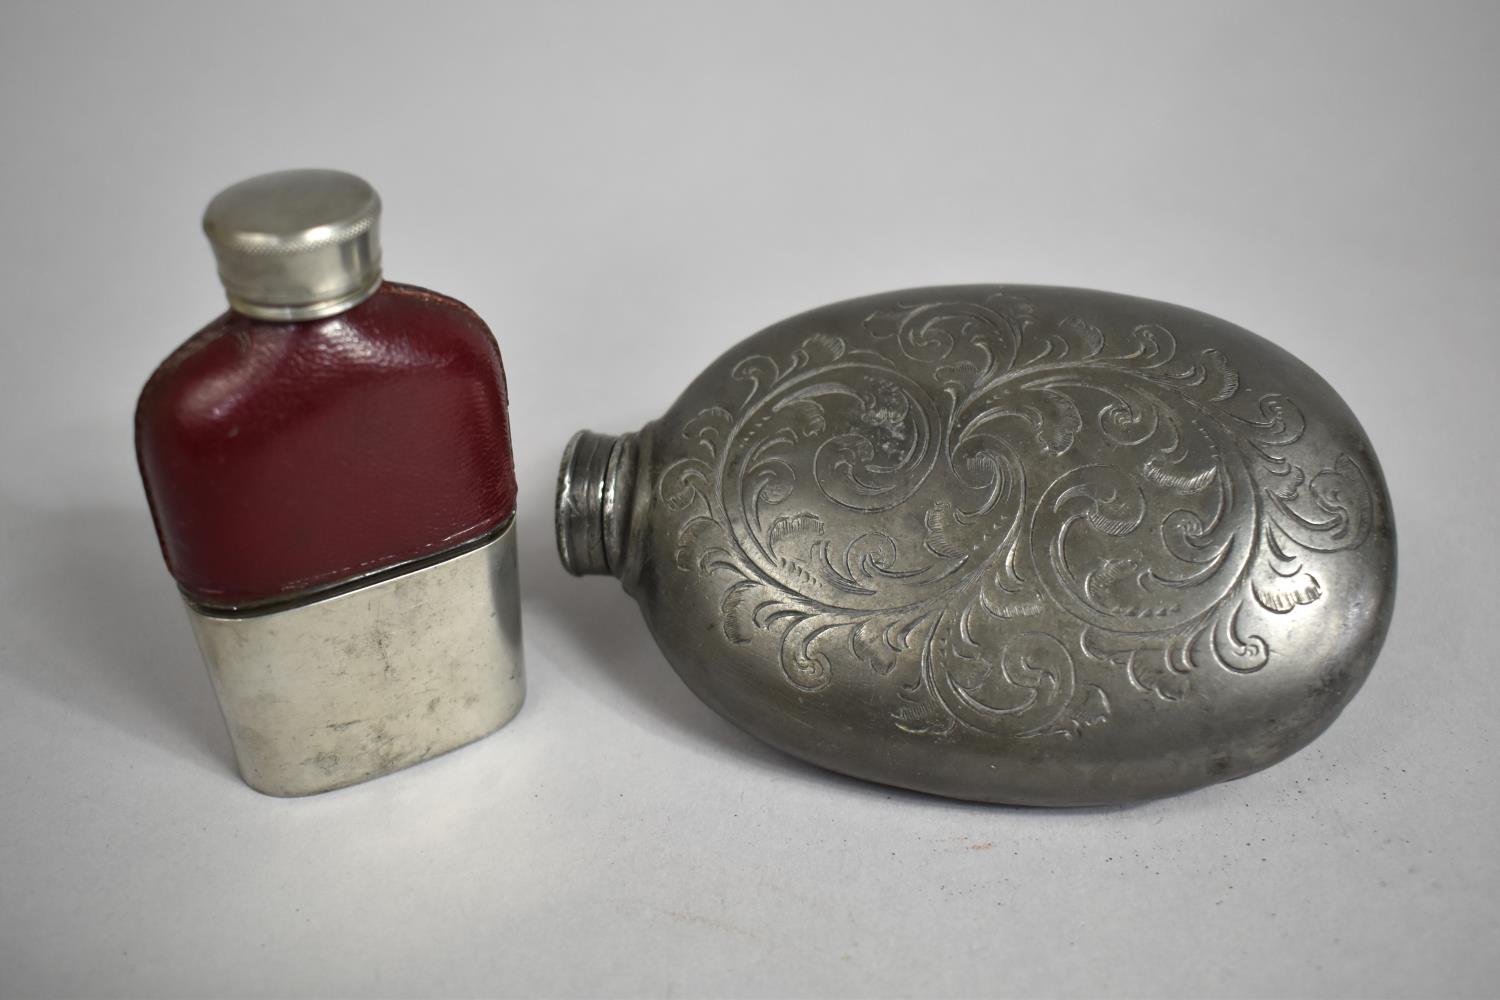 Two Hip Flasks, Larger being a Pewter Example with Scrolled Decoration, Smaller with Leather top